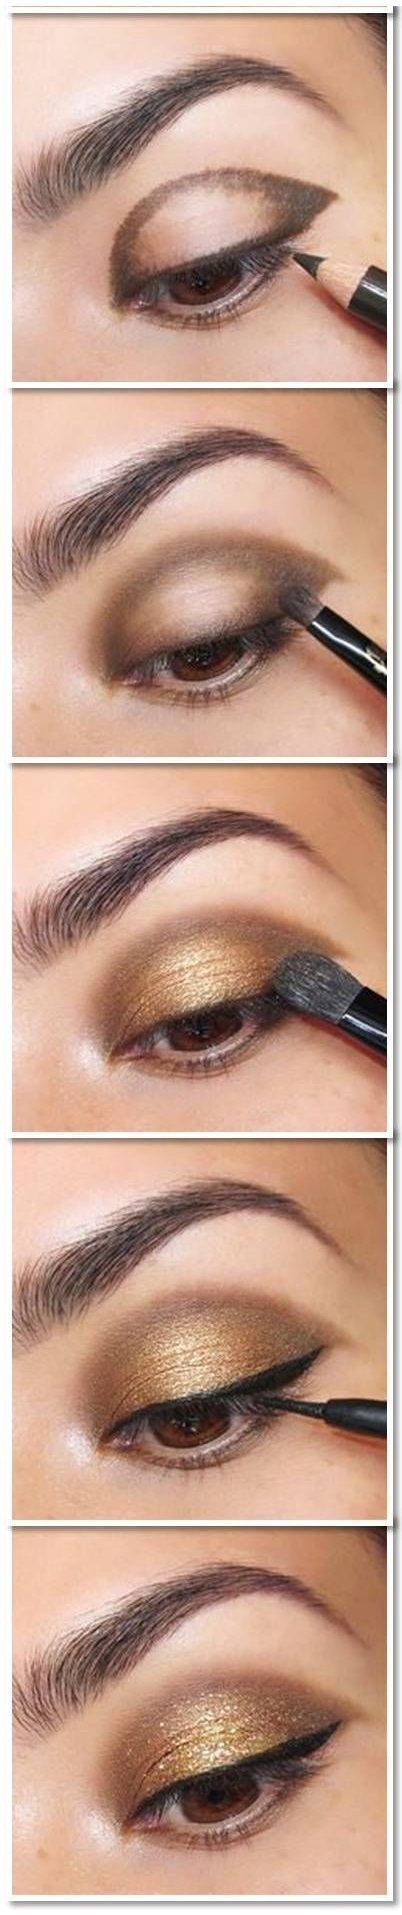 professional-makeup-tutorial-for-brown-eyes-08_13 Professionele make - up tutorial voor bruine ogen